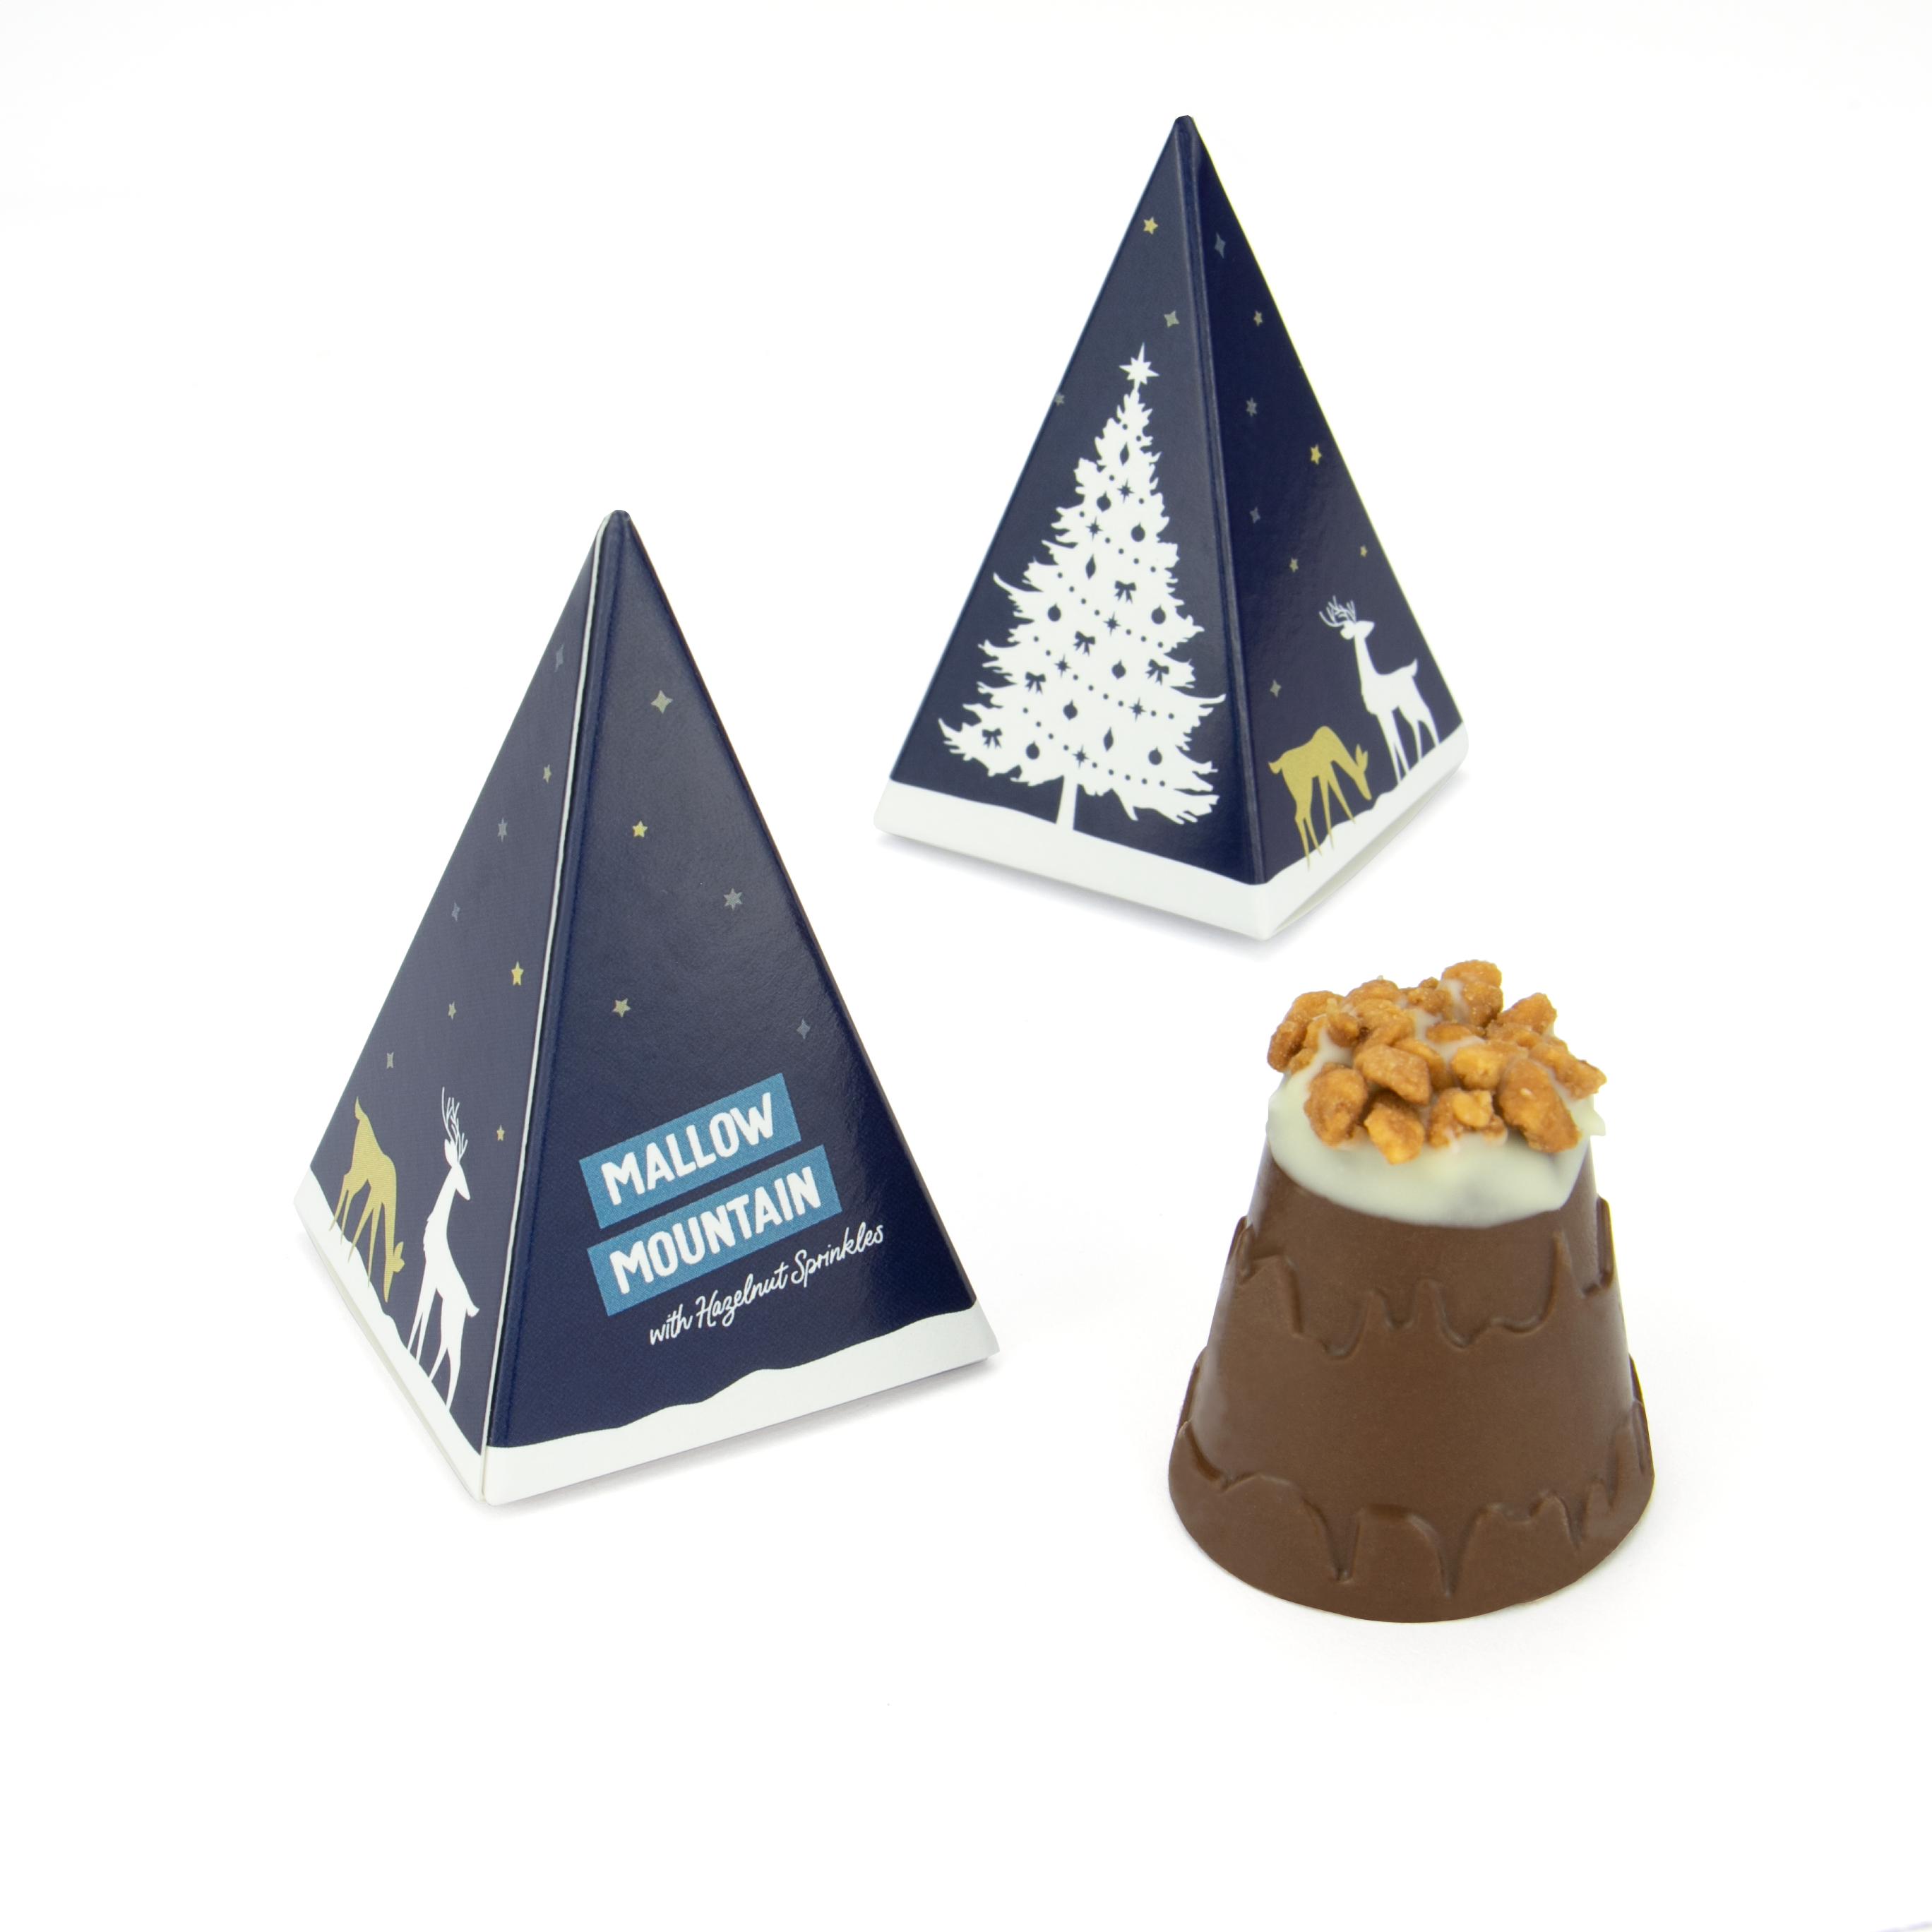 Winter Collection – Eco Pyramid Box - Mallow Mountain with Hazelnut Sprinkles*